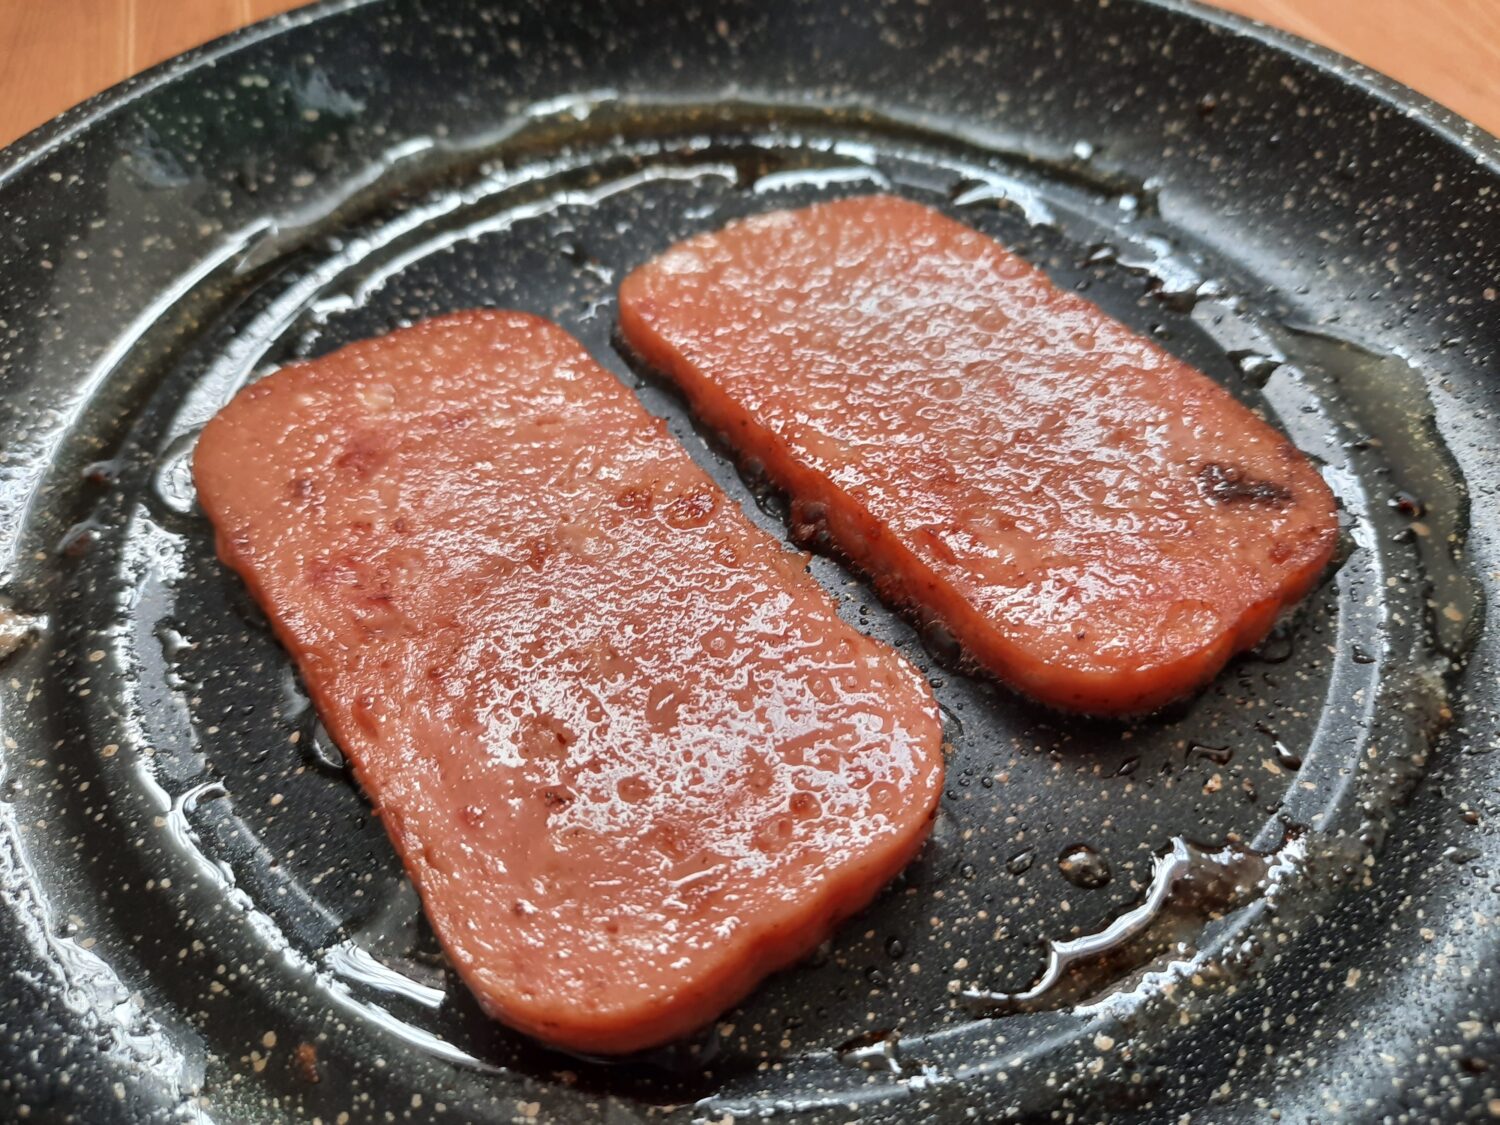 Two pieces of spam on a frying pan